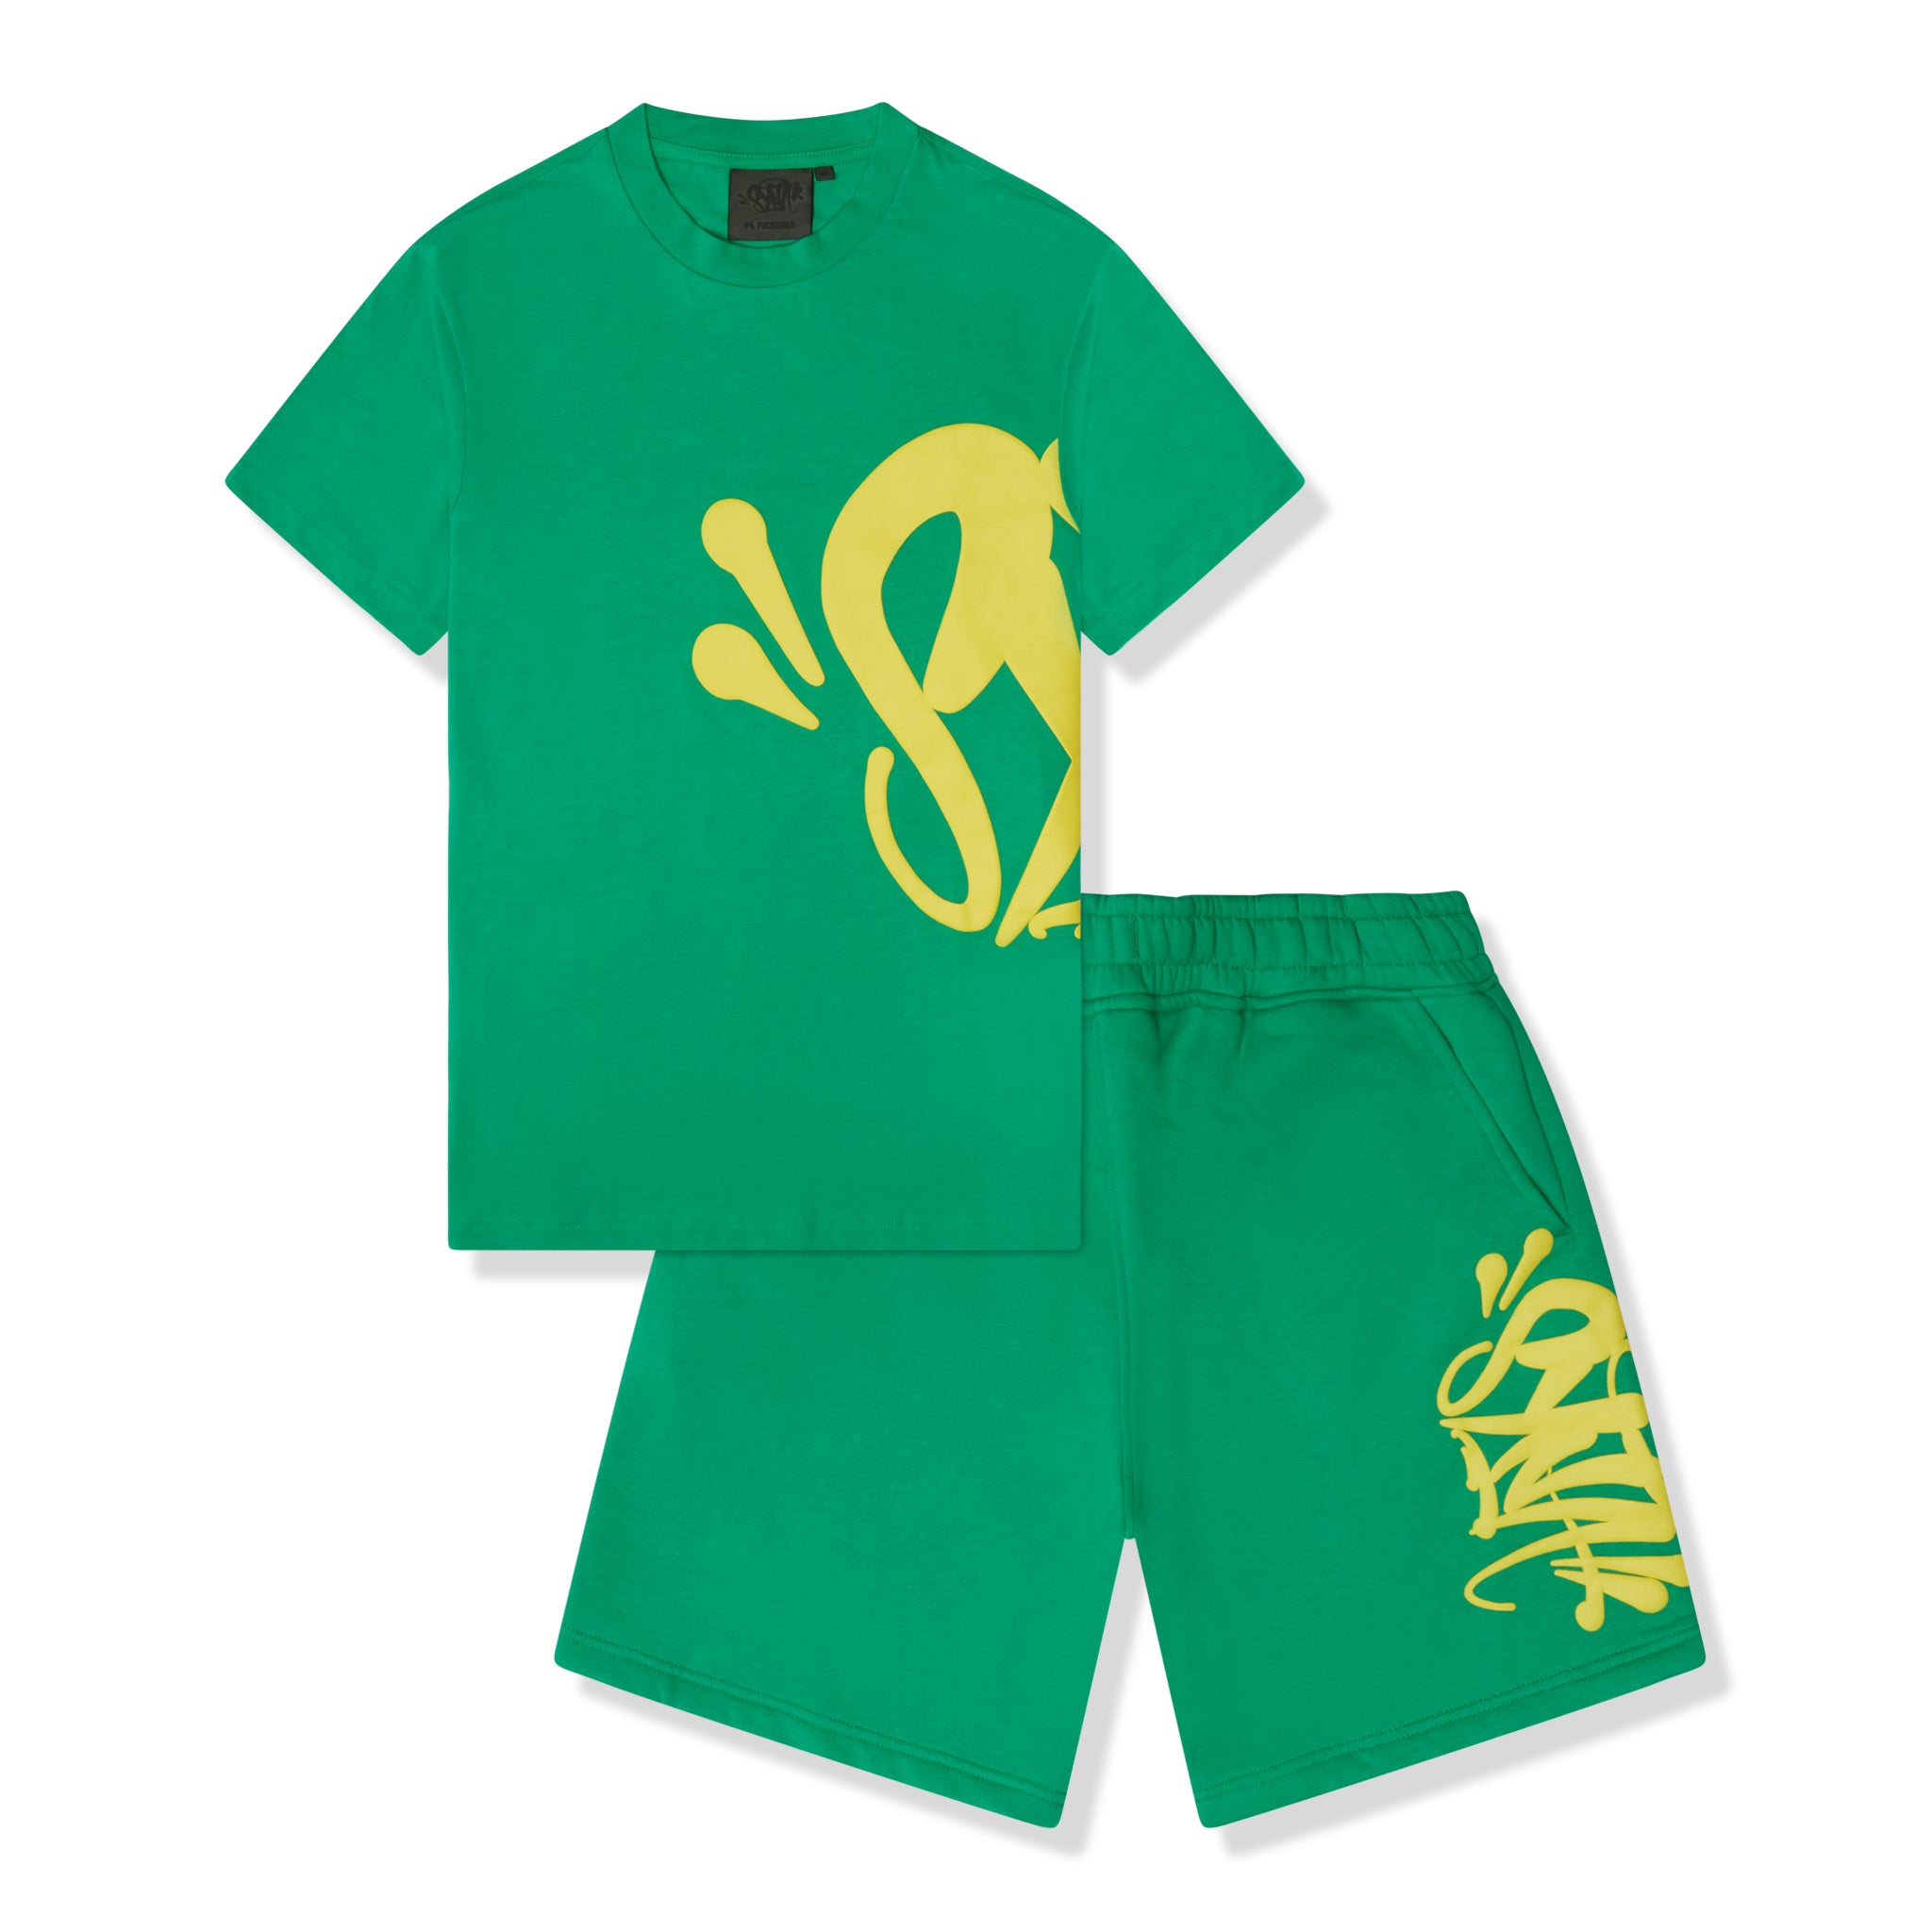 Front view of Syna World Team Syna Twinset Green T-Shirt & Shorts 